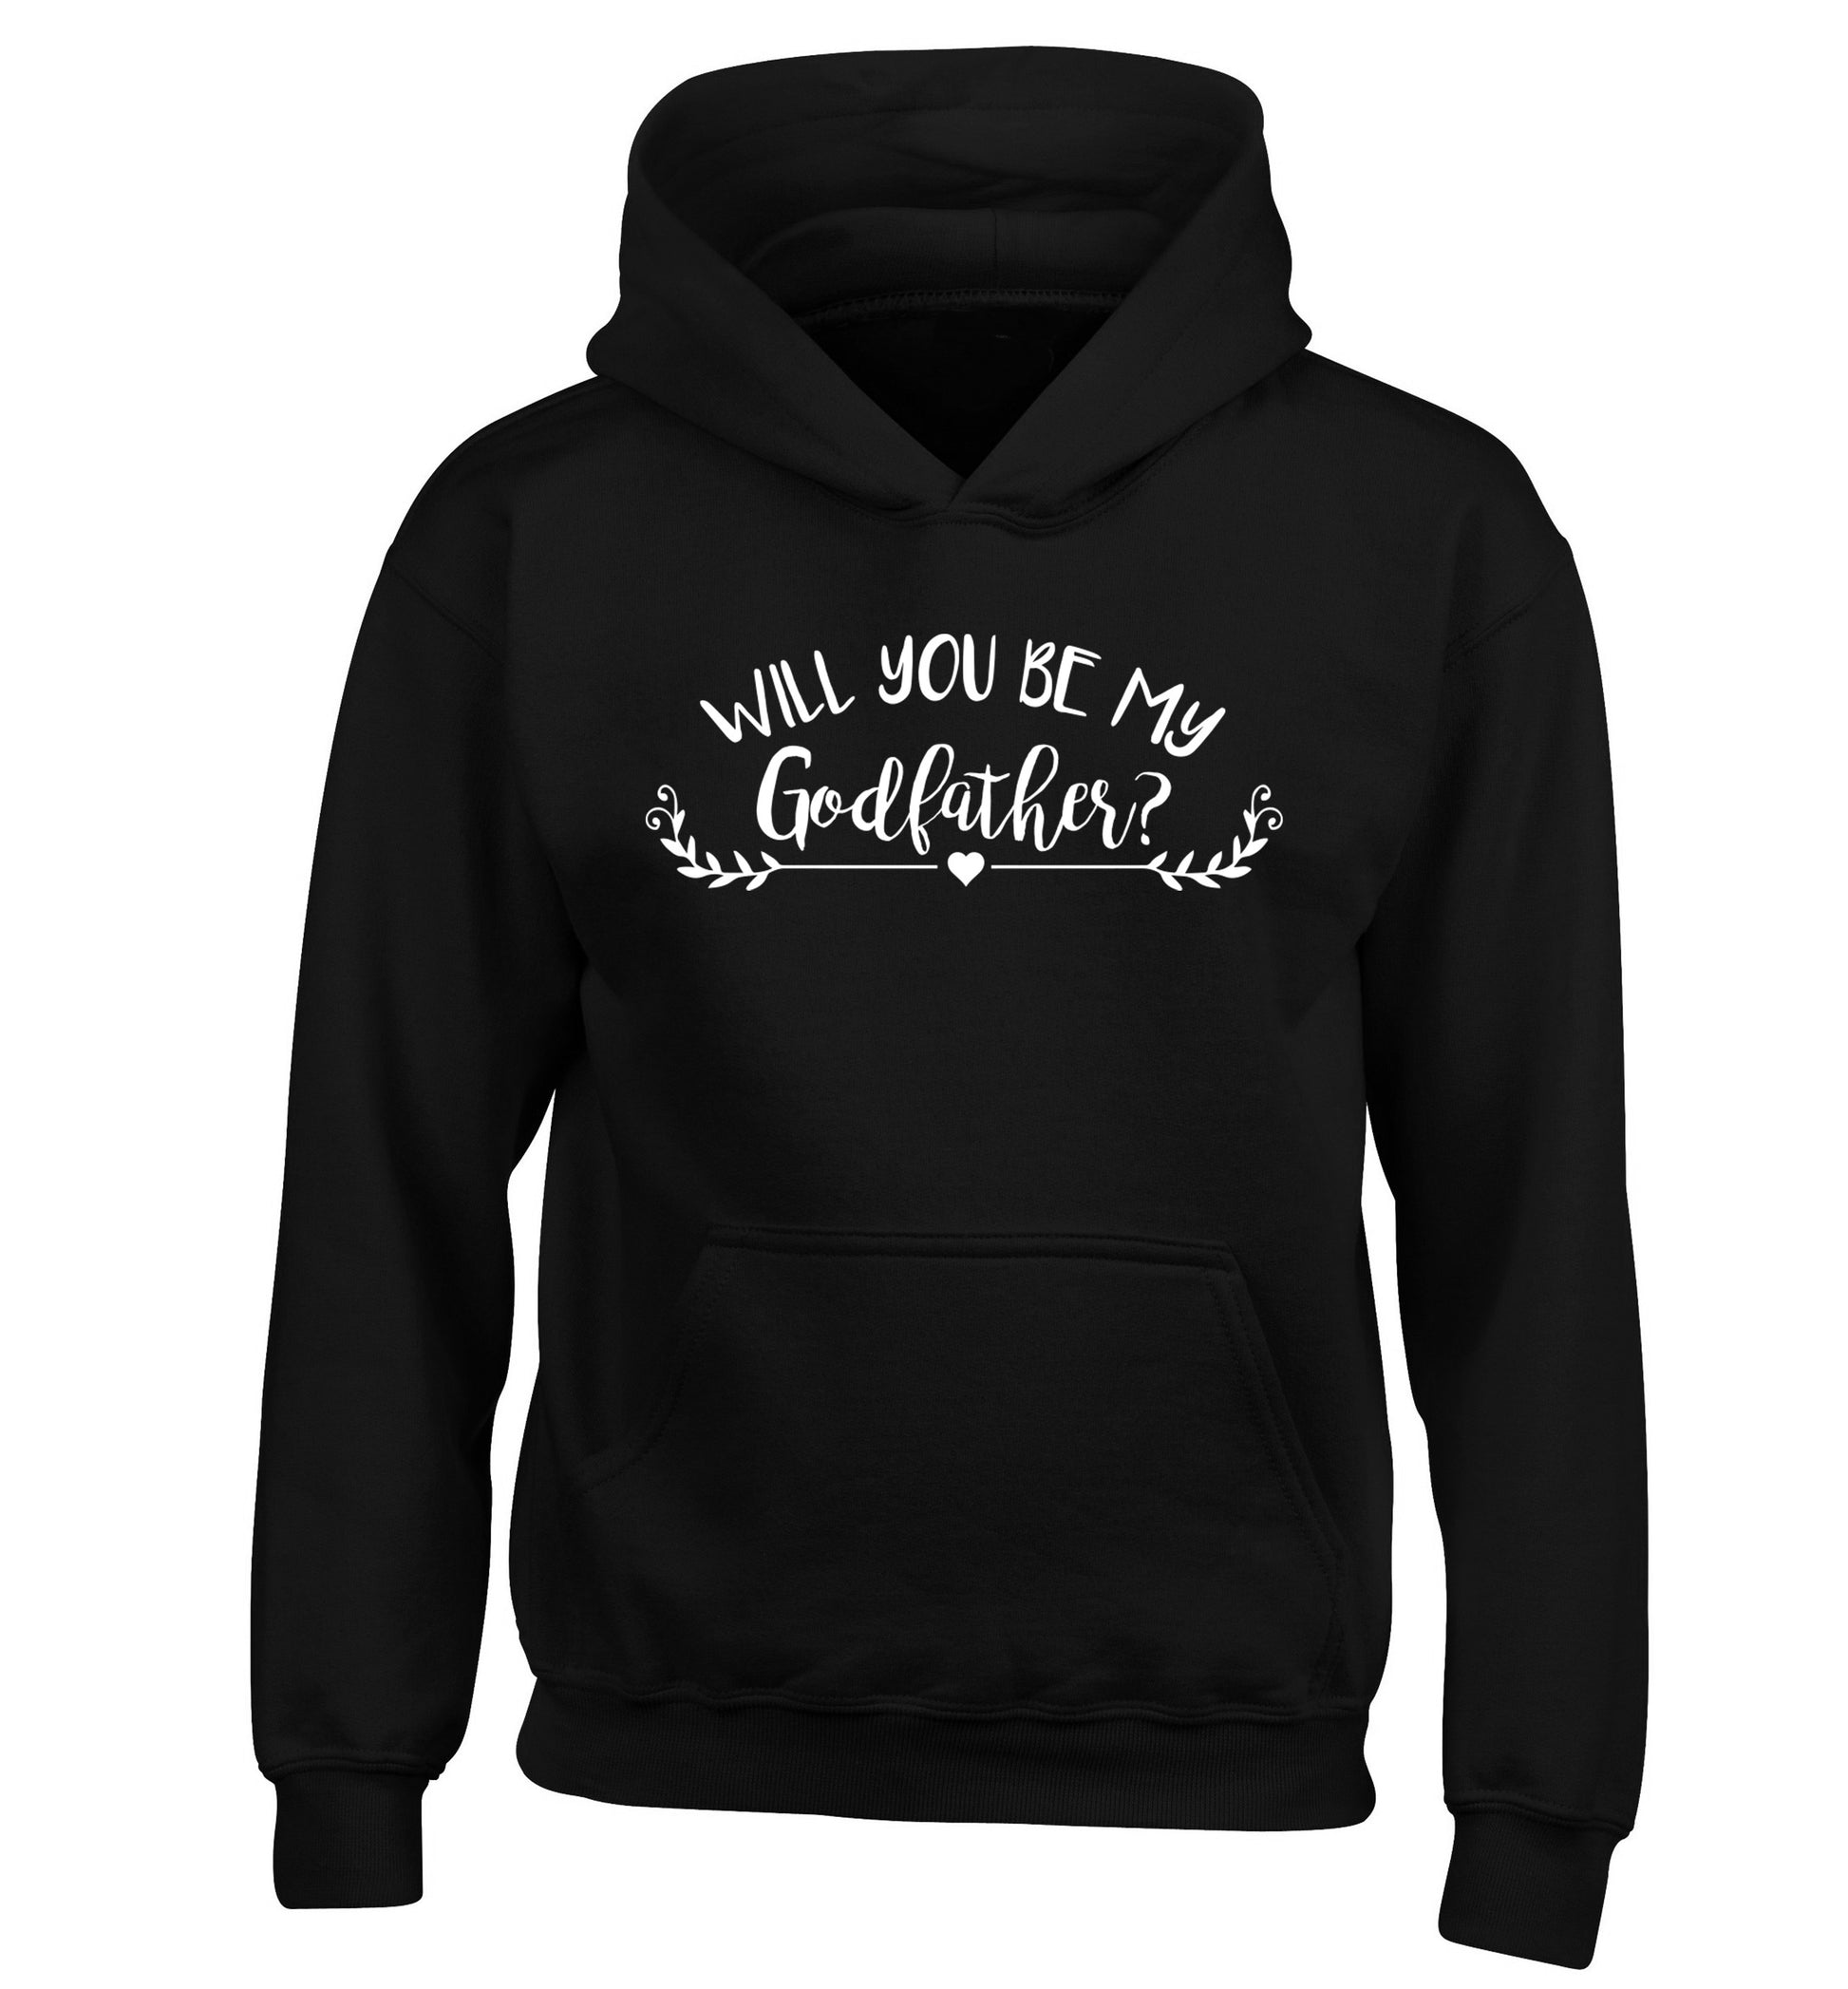 Will you be my godfather? children's black hoodie 12-14 Years